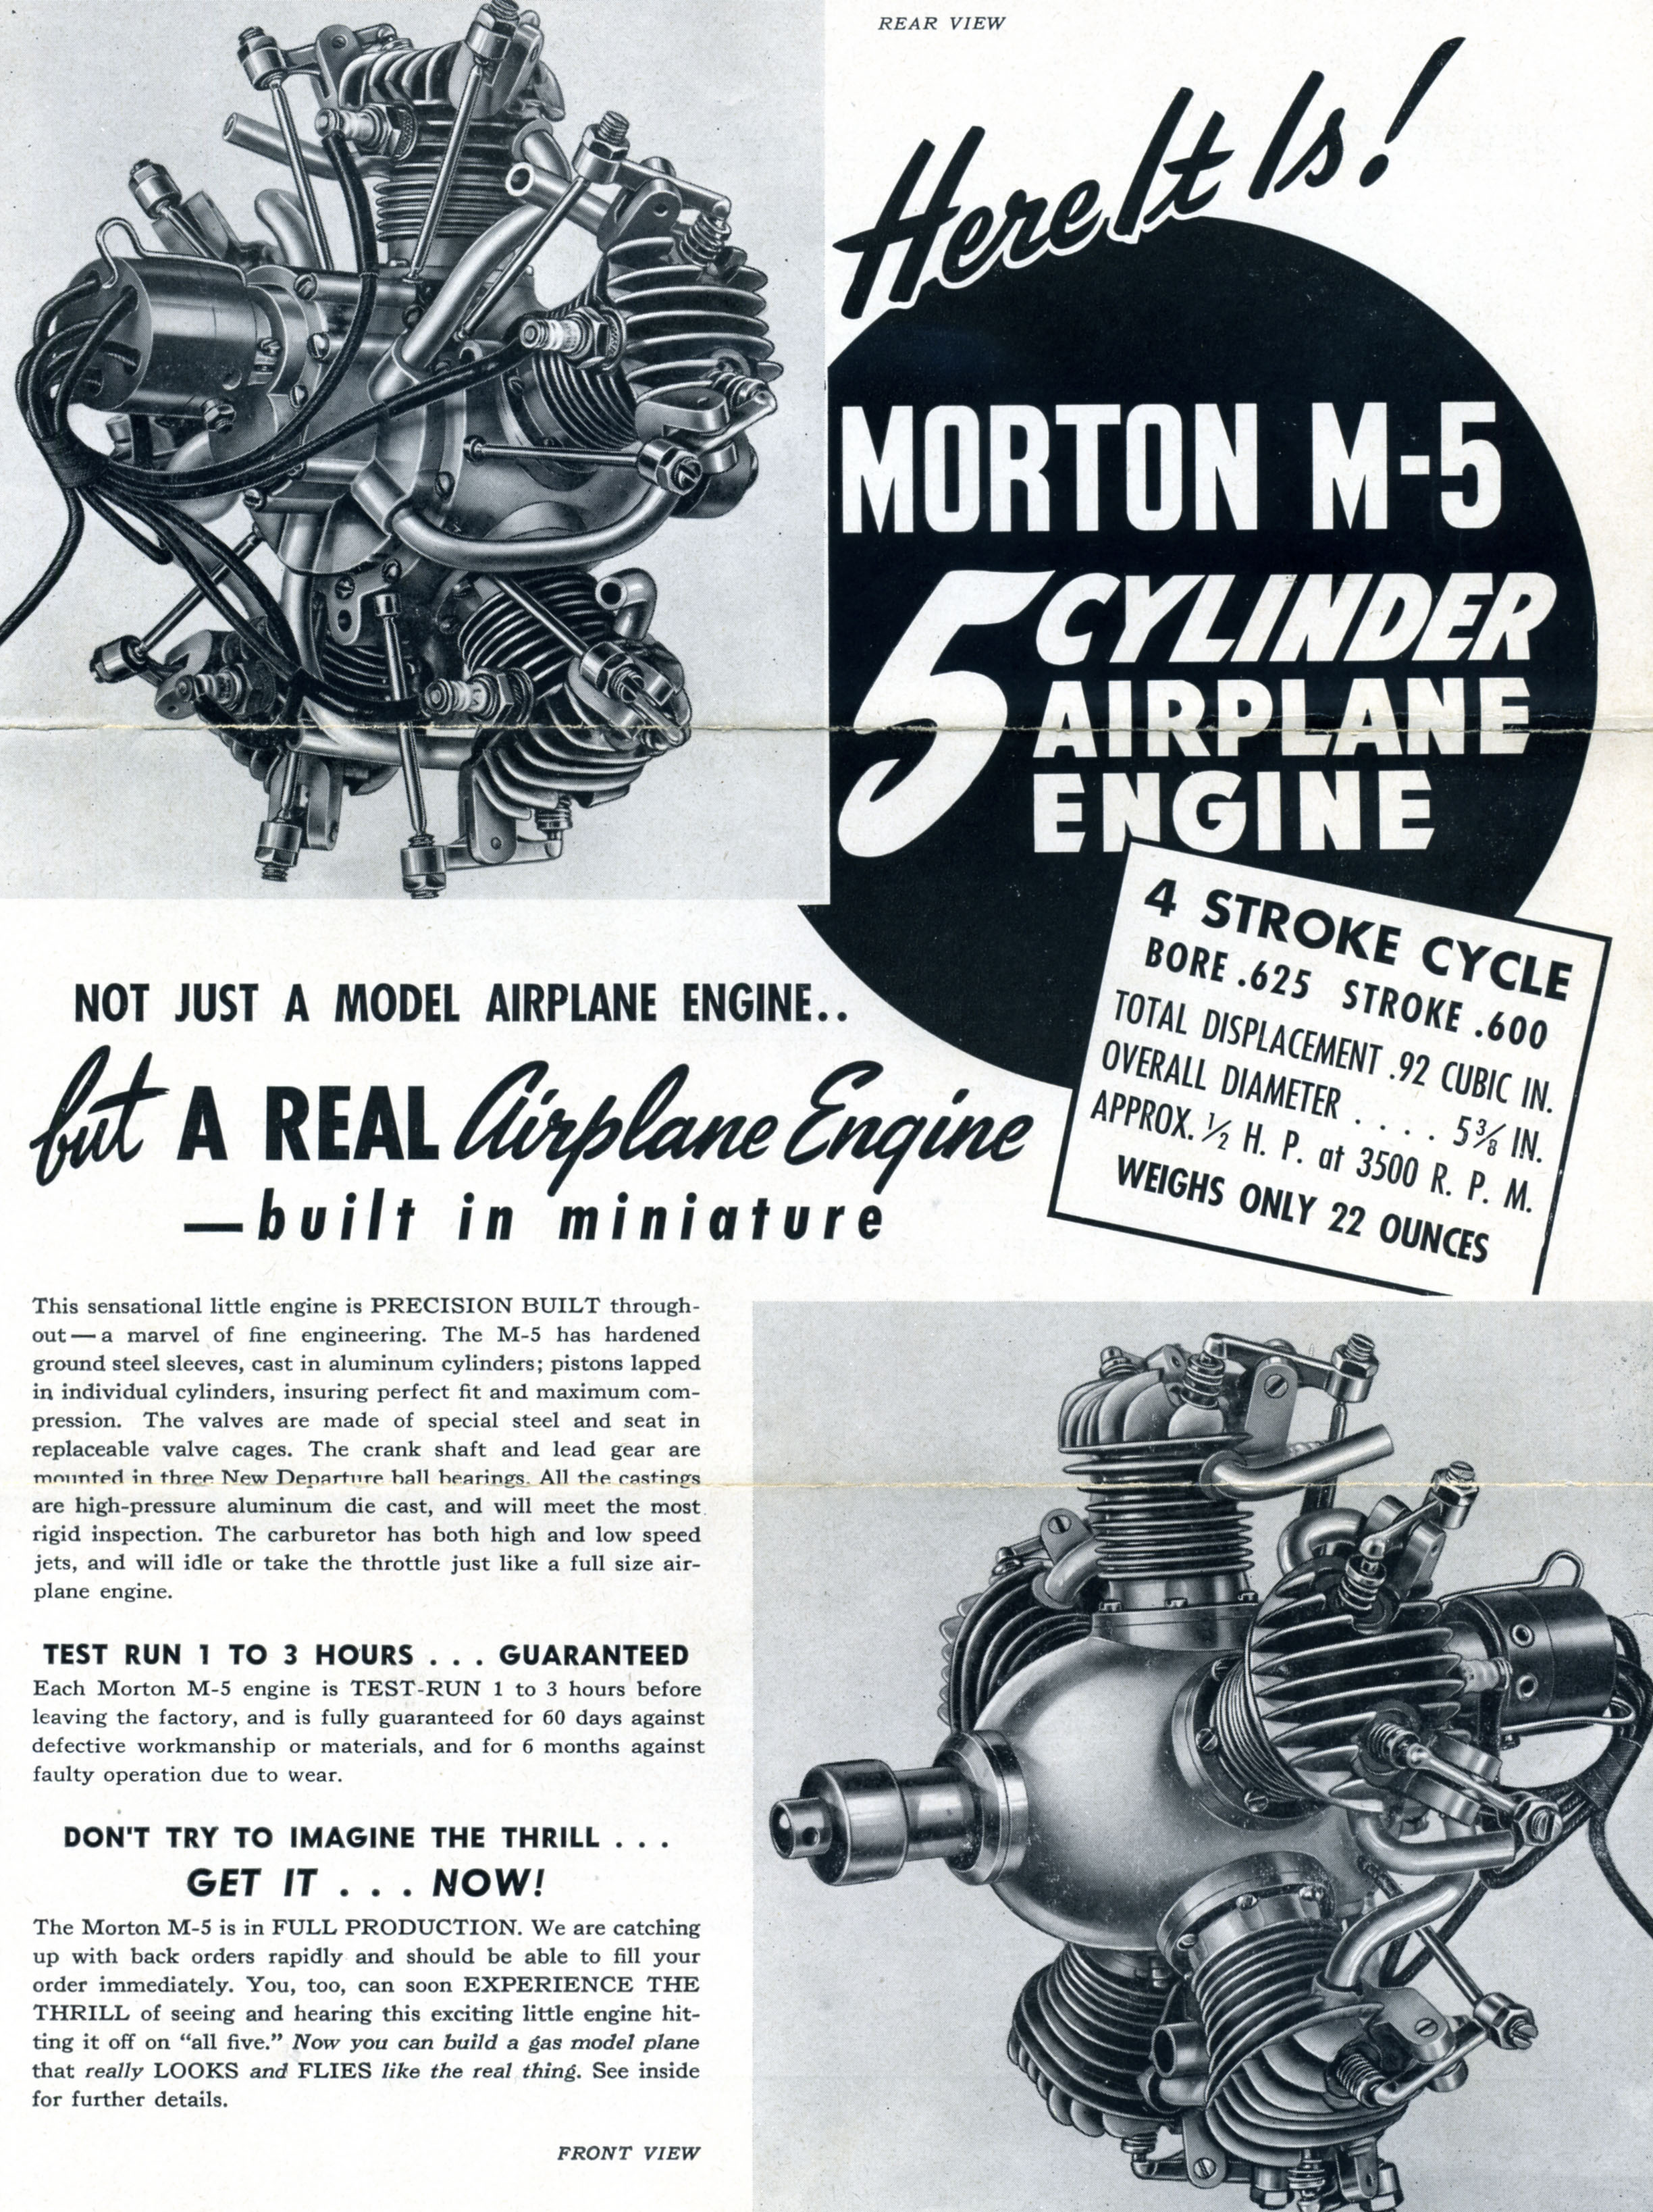 Advertisement brochure, Morton Aircraft Corporation, c. 1945. (Source: National Model Aviation Museum Archives, Manufacturers and Companies Collection #0043) 